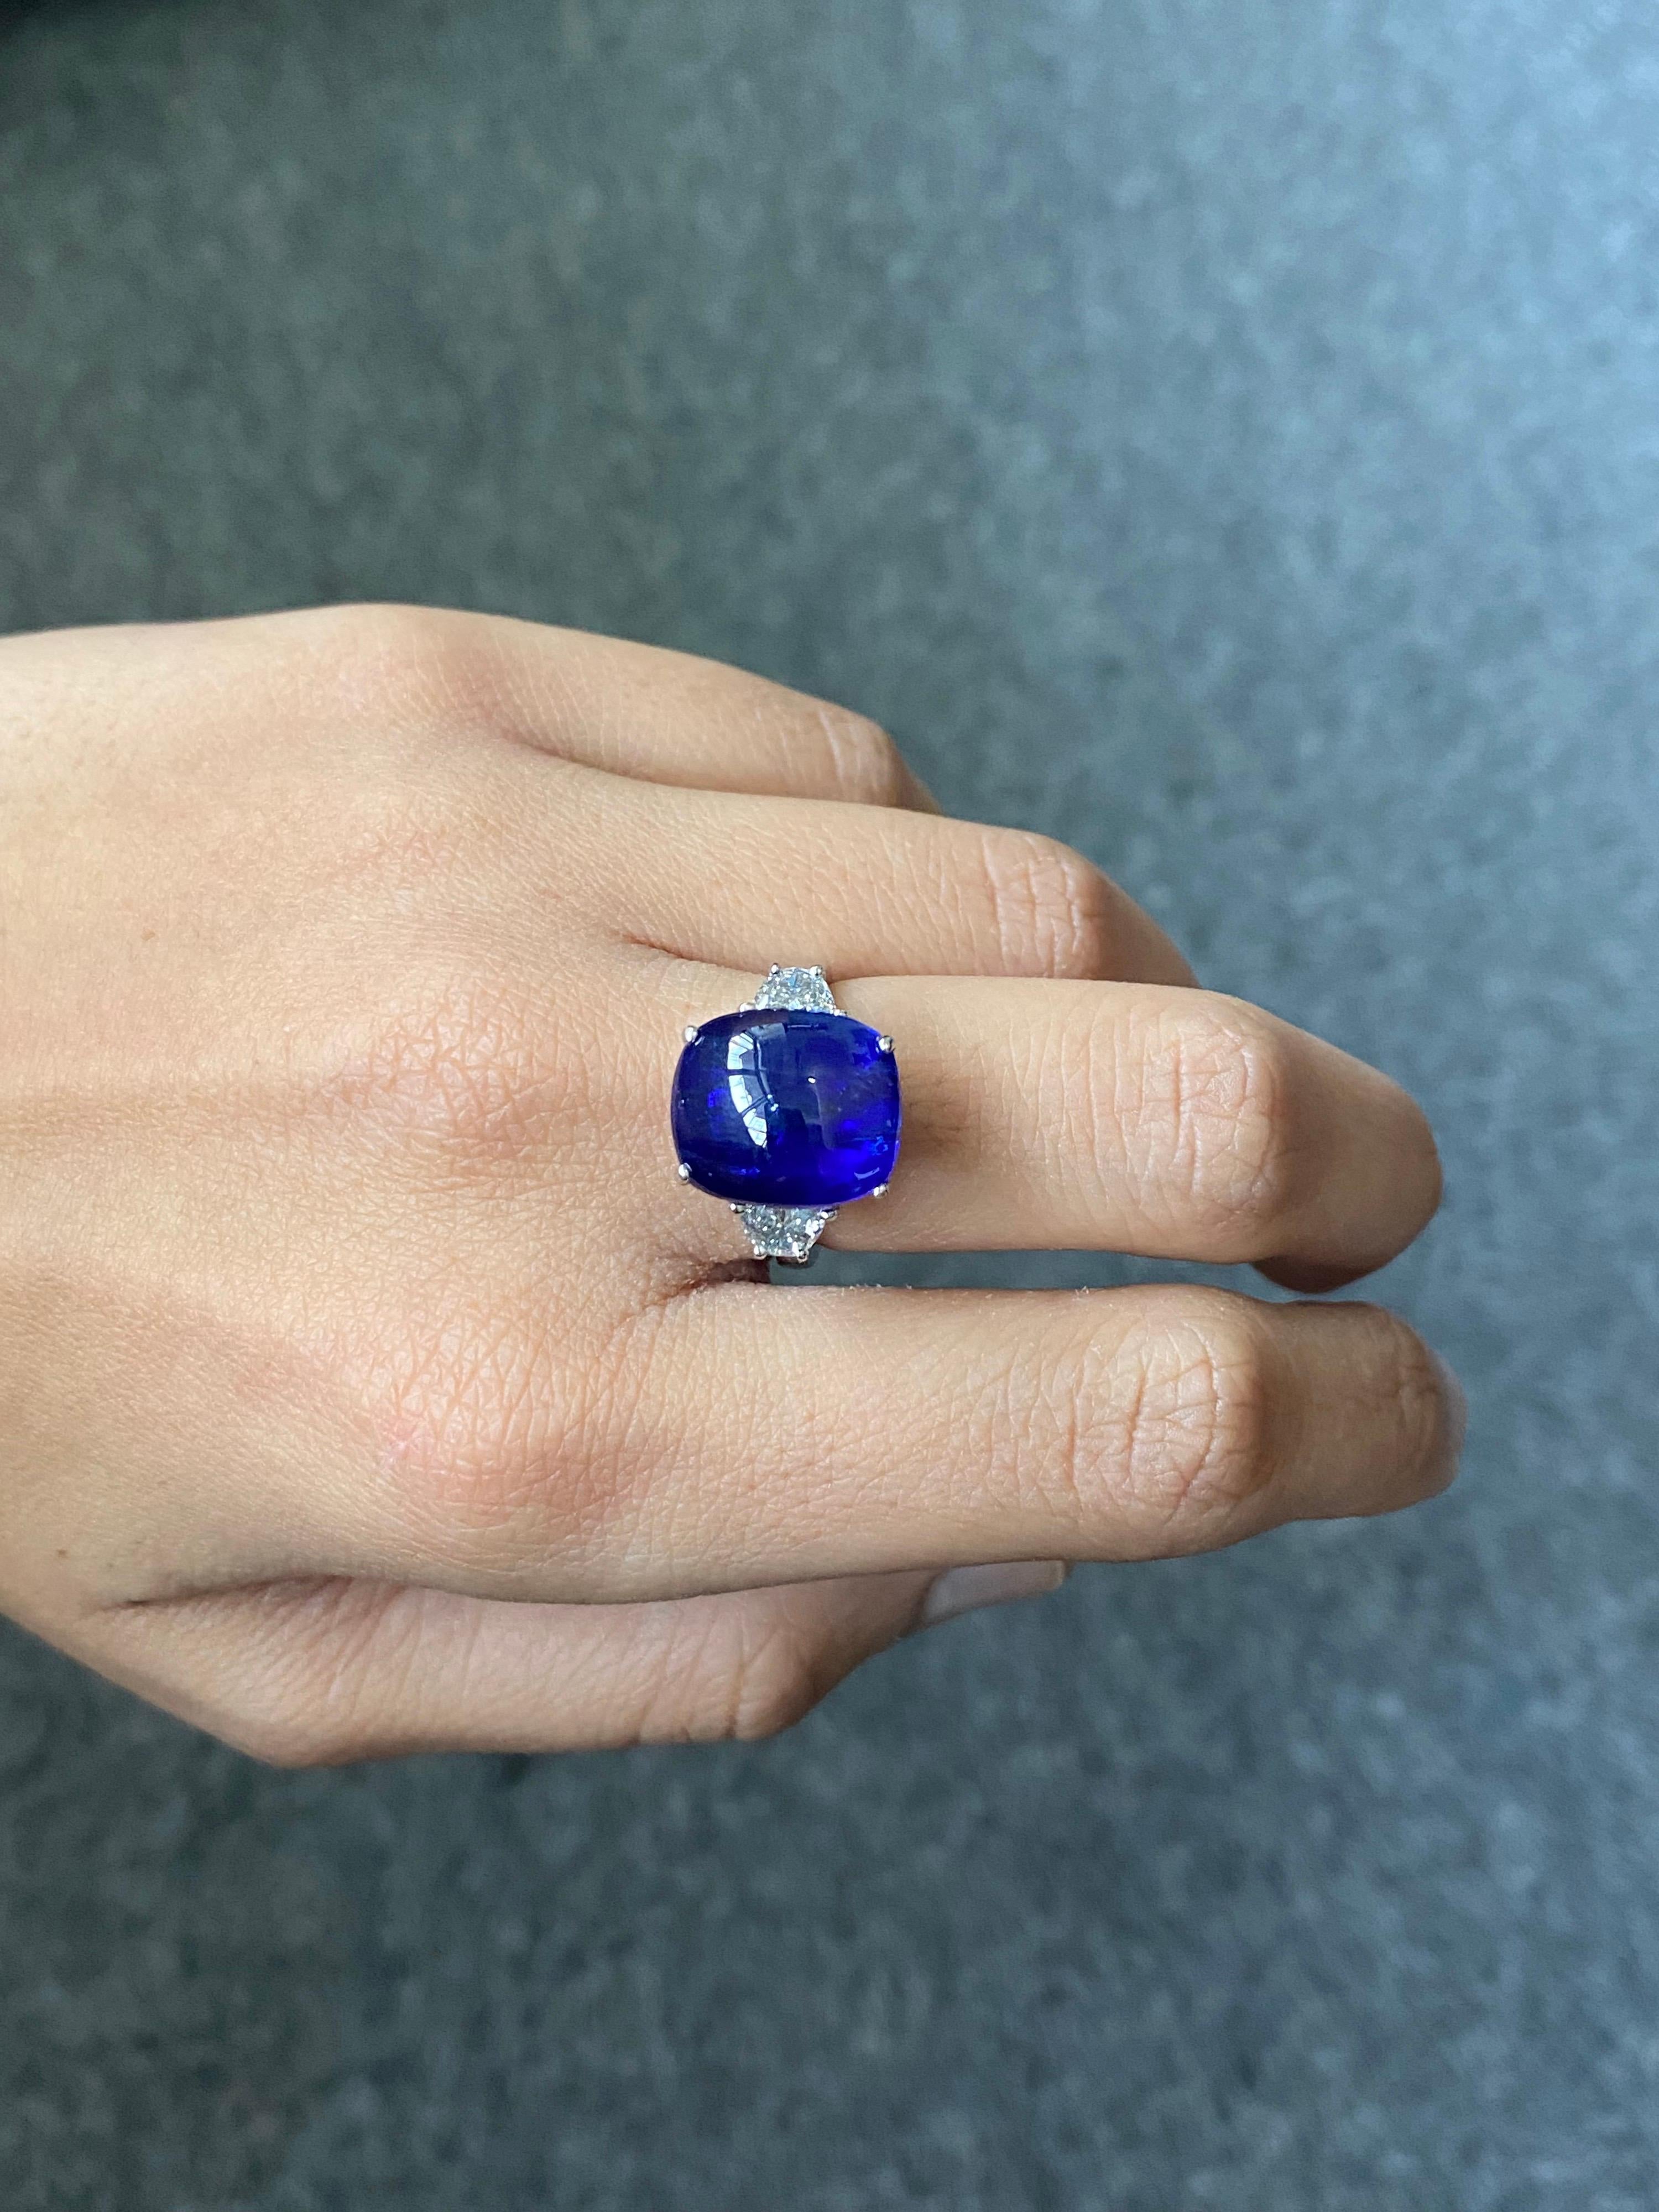 A beautiful, Ceylon Blue Sapphire and Diamond three-stone engagement ring set in solid 18K White Gold. With a 13.35 carat cushion shaped Sapphire in the centre, with half-moon White Diamonds on the side. The Sapphire is transparent, with a beautiful